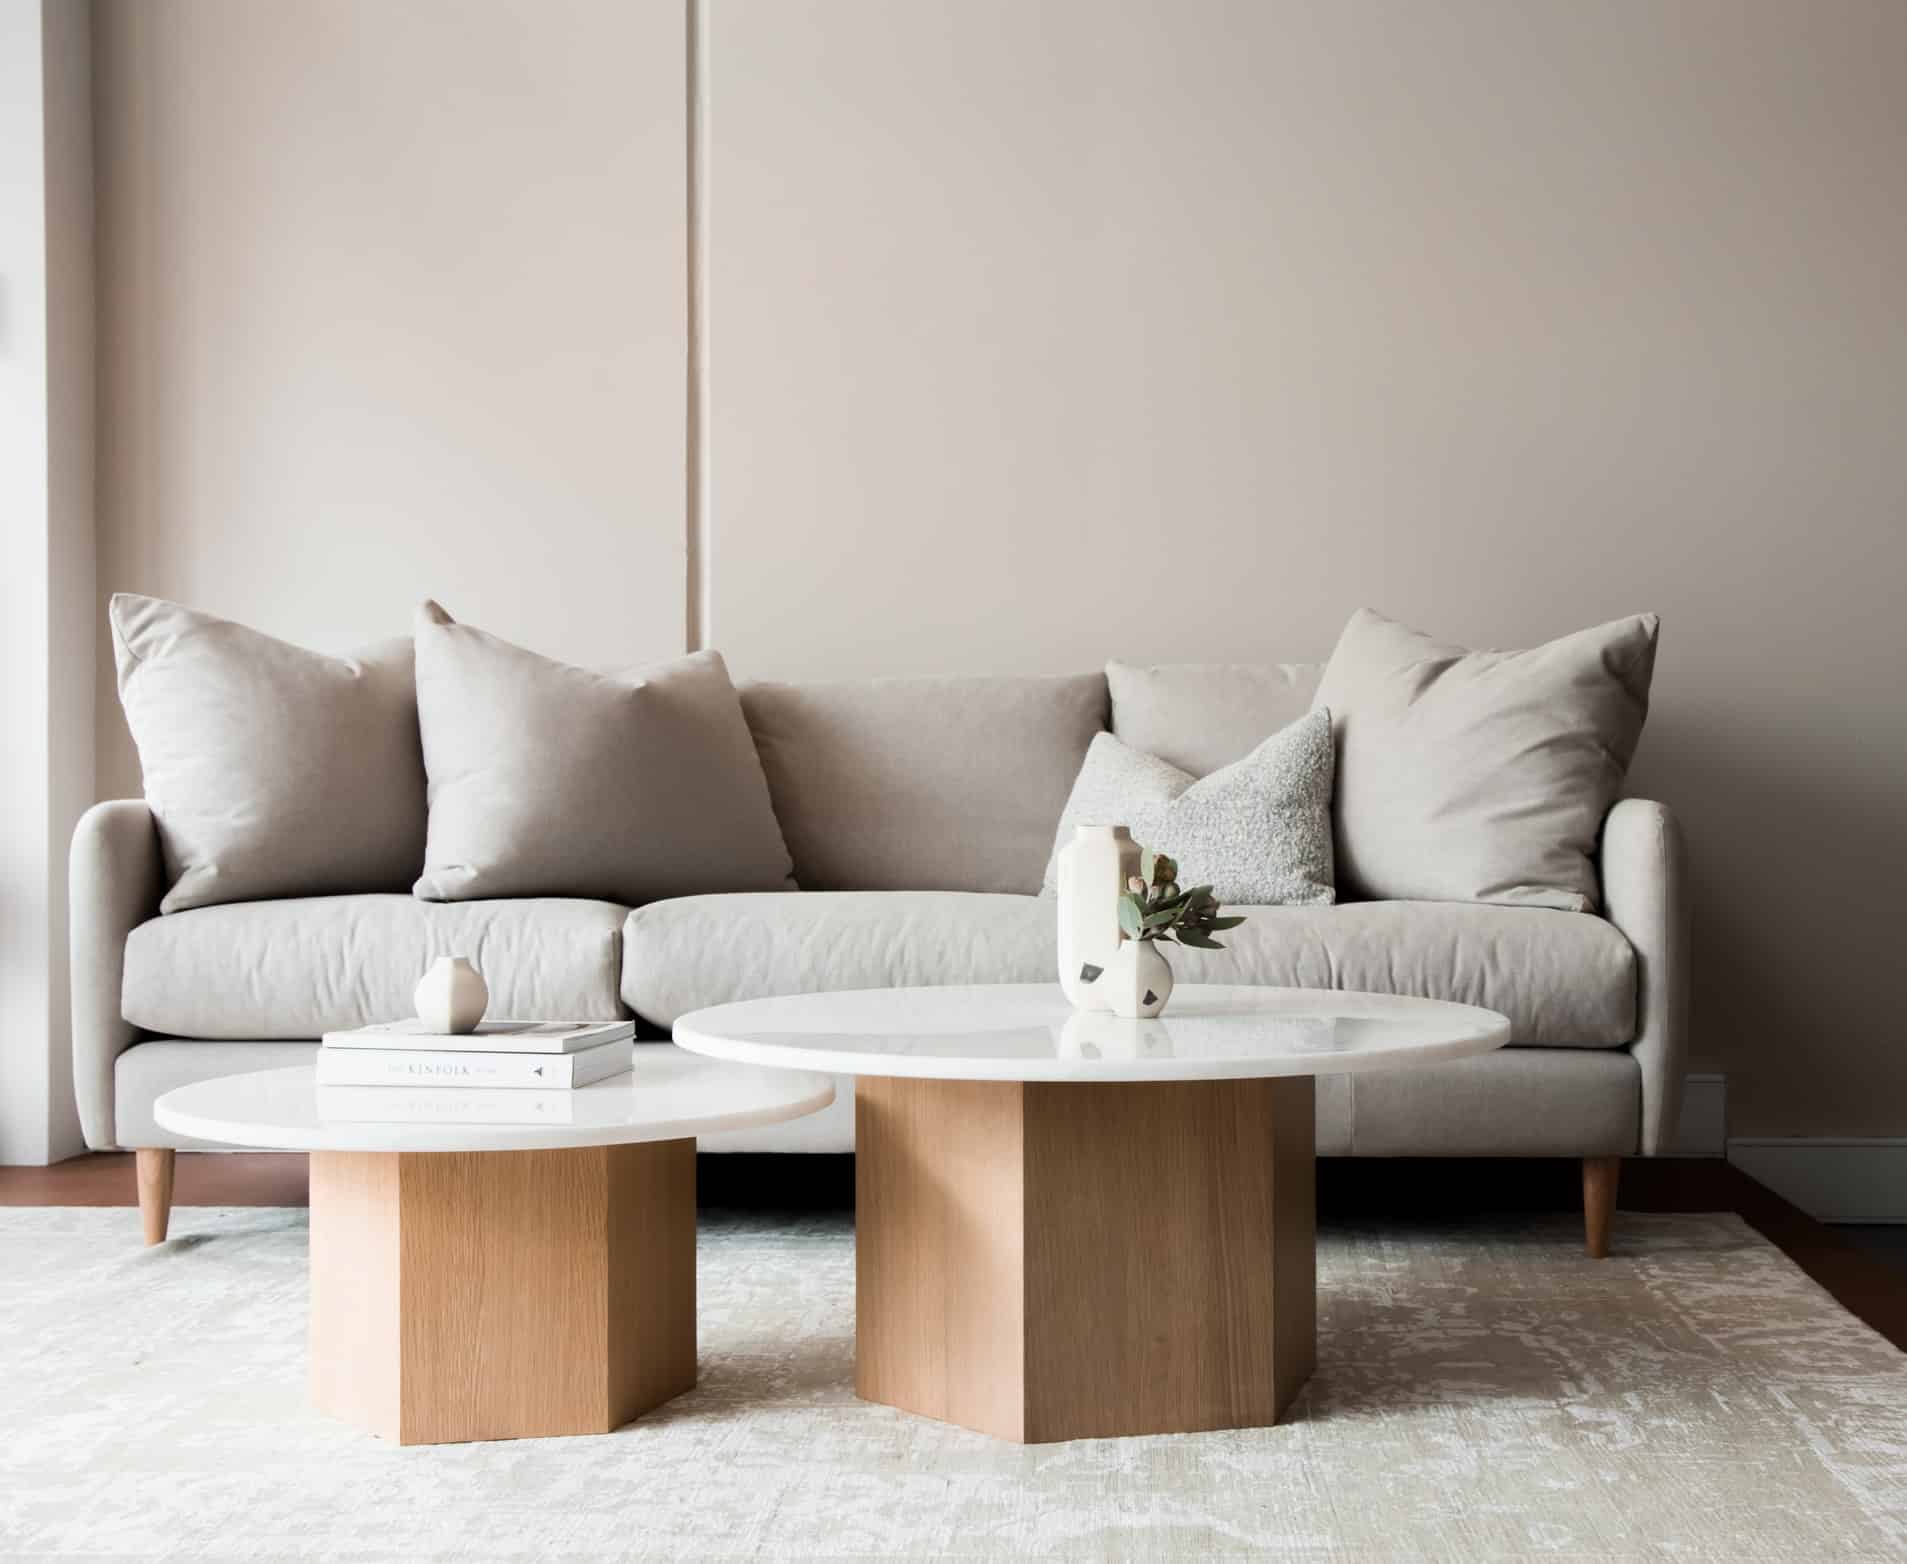 Why are Sofas So Expensive?